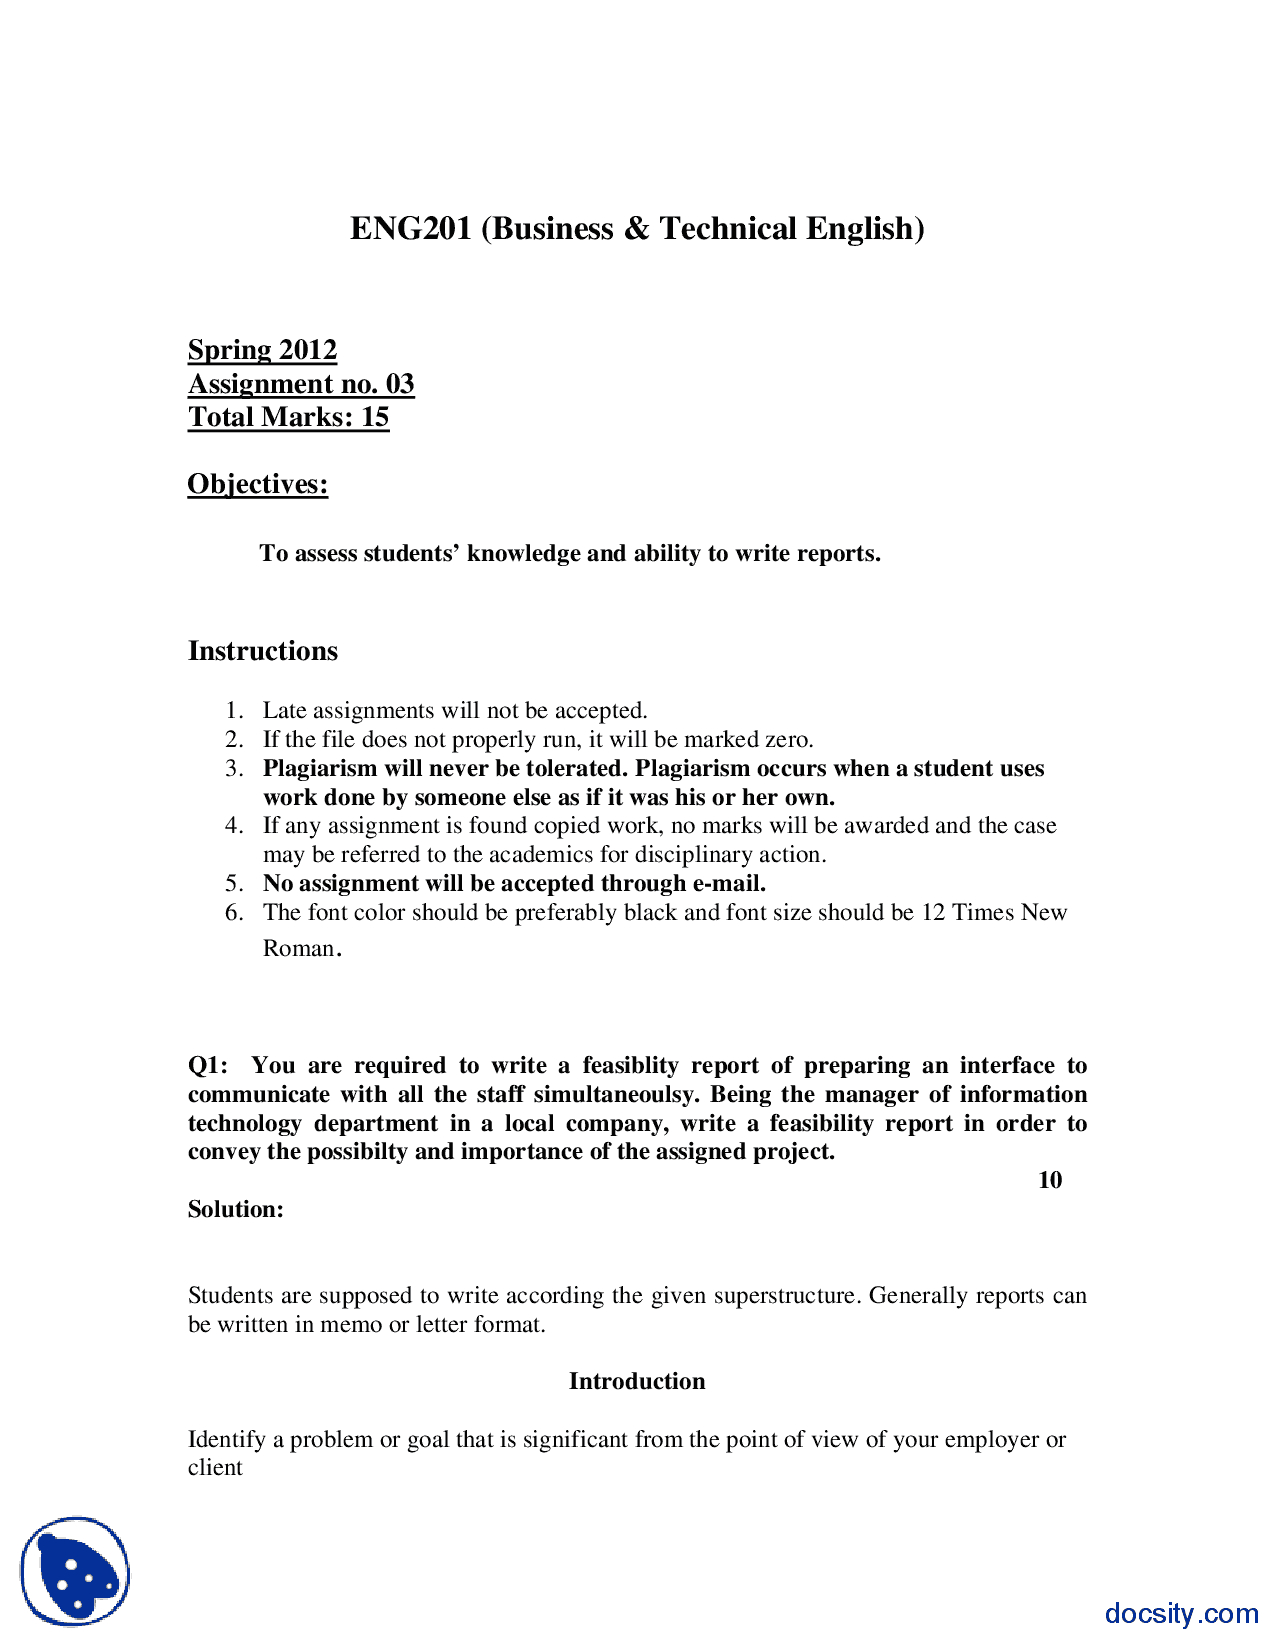 Feasibility Report Business Communication And English With Technical Feasibility Report Template